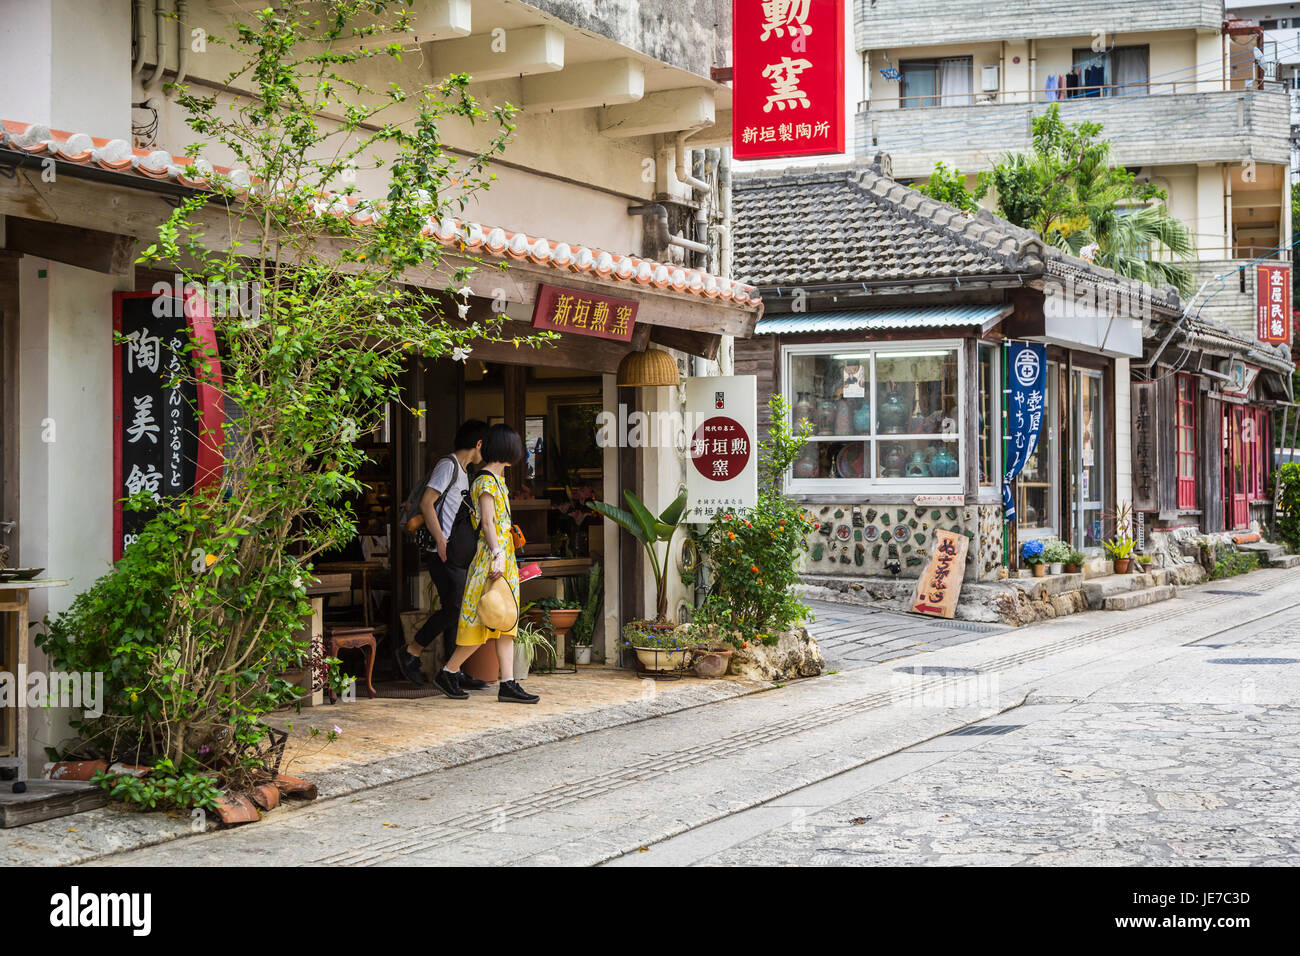 Shops and stores in the Pottery Village of Naha, Okinawa, Japan. Stock Photo